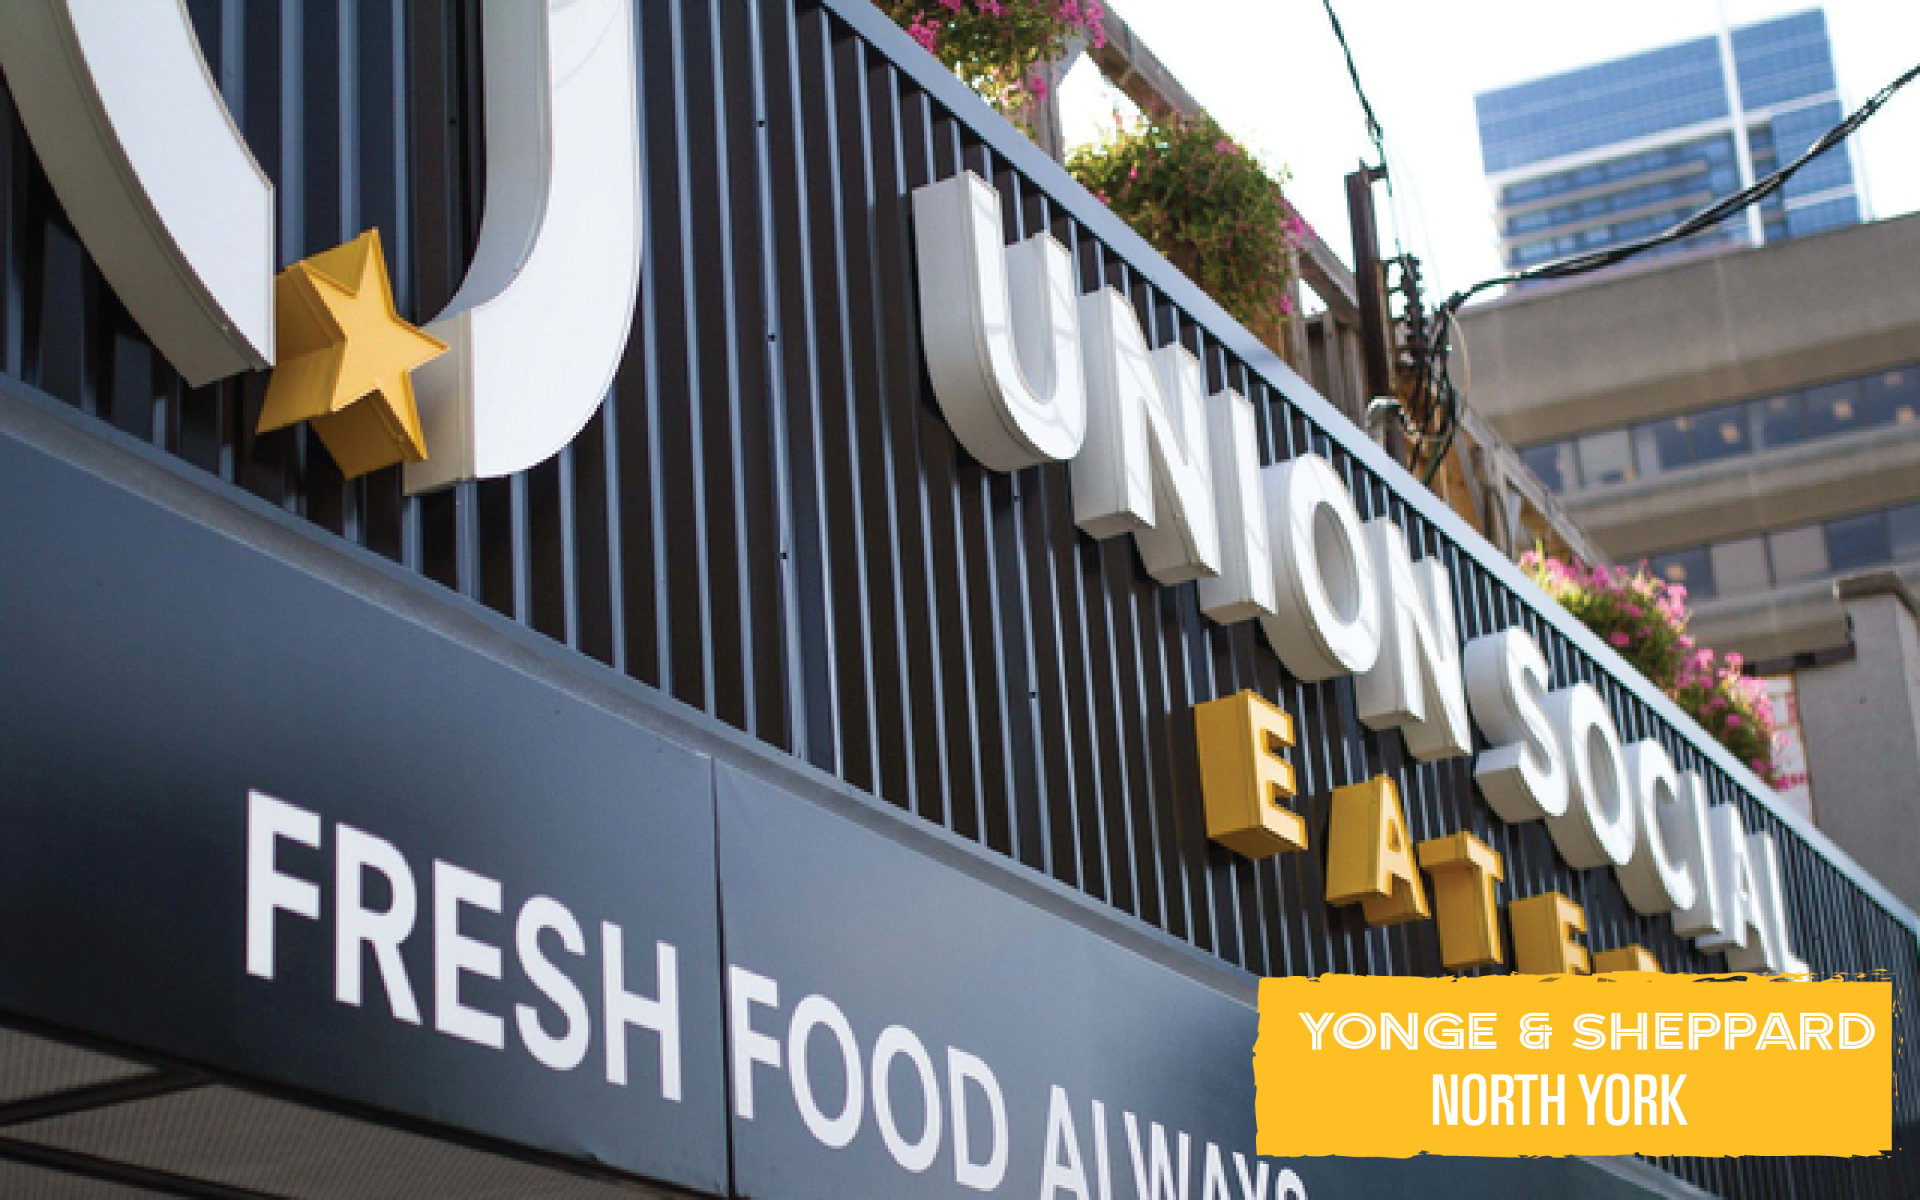 Image of union social yonge and sheppard